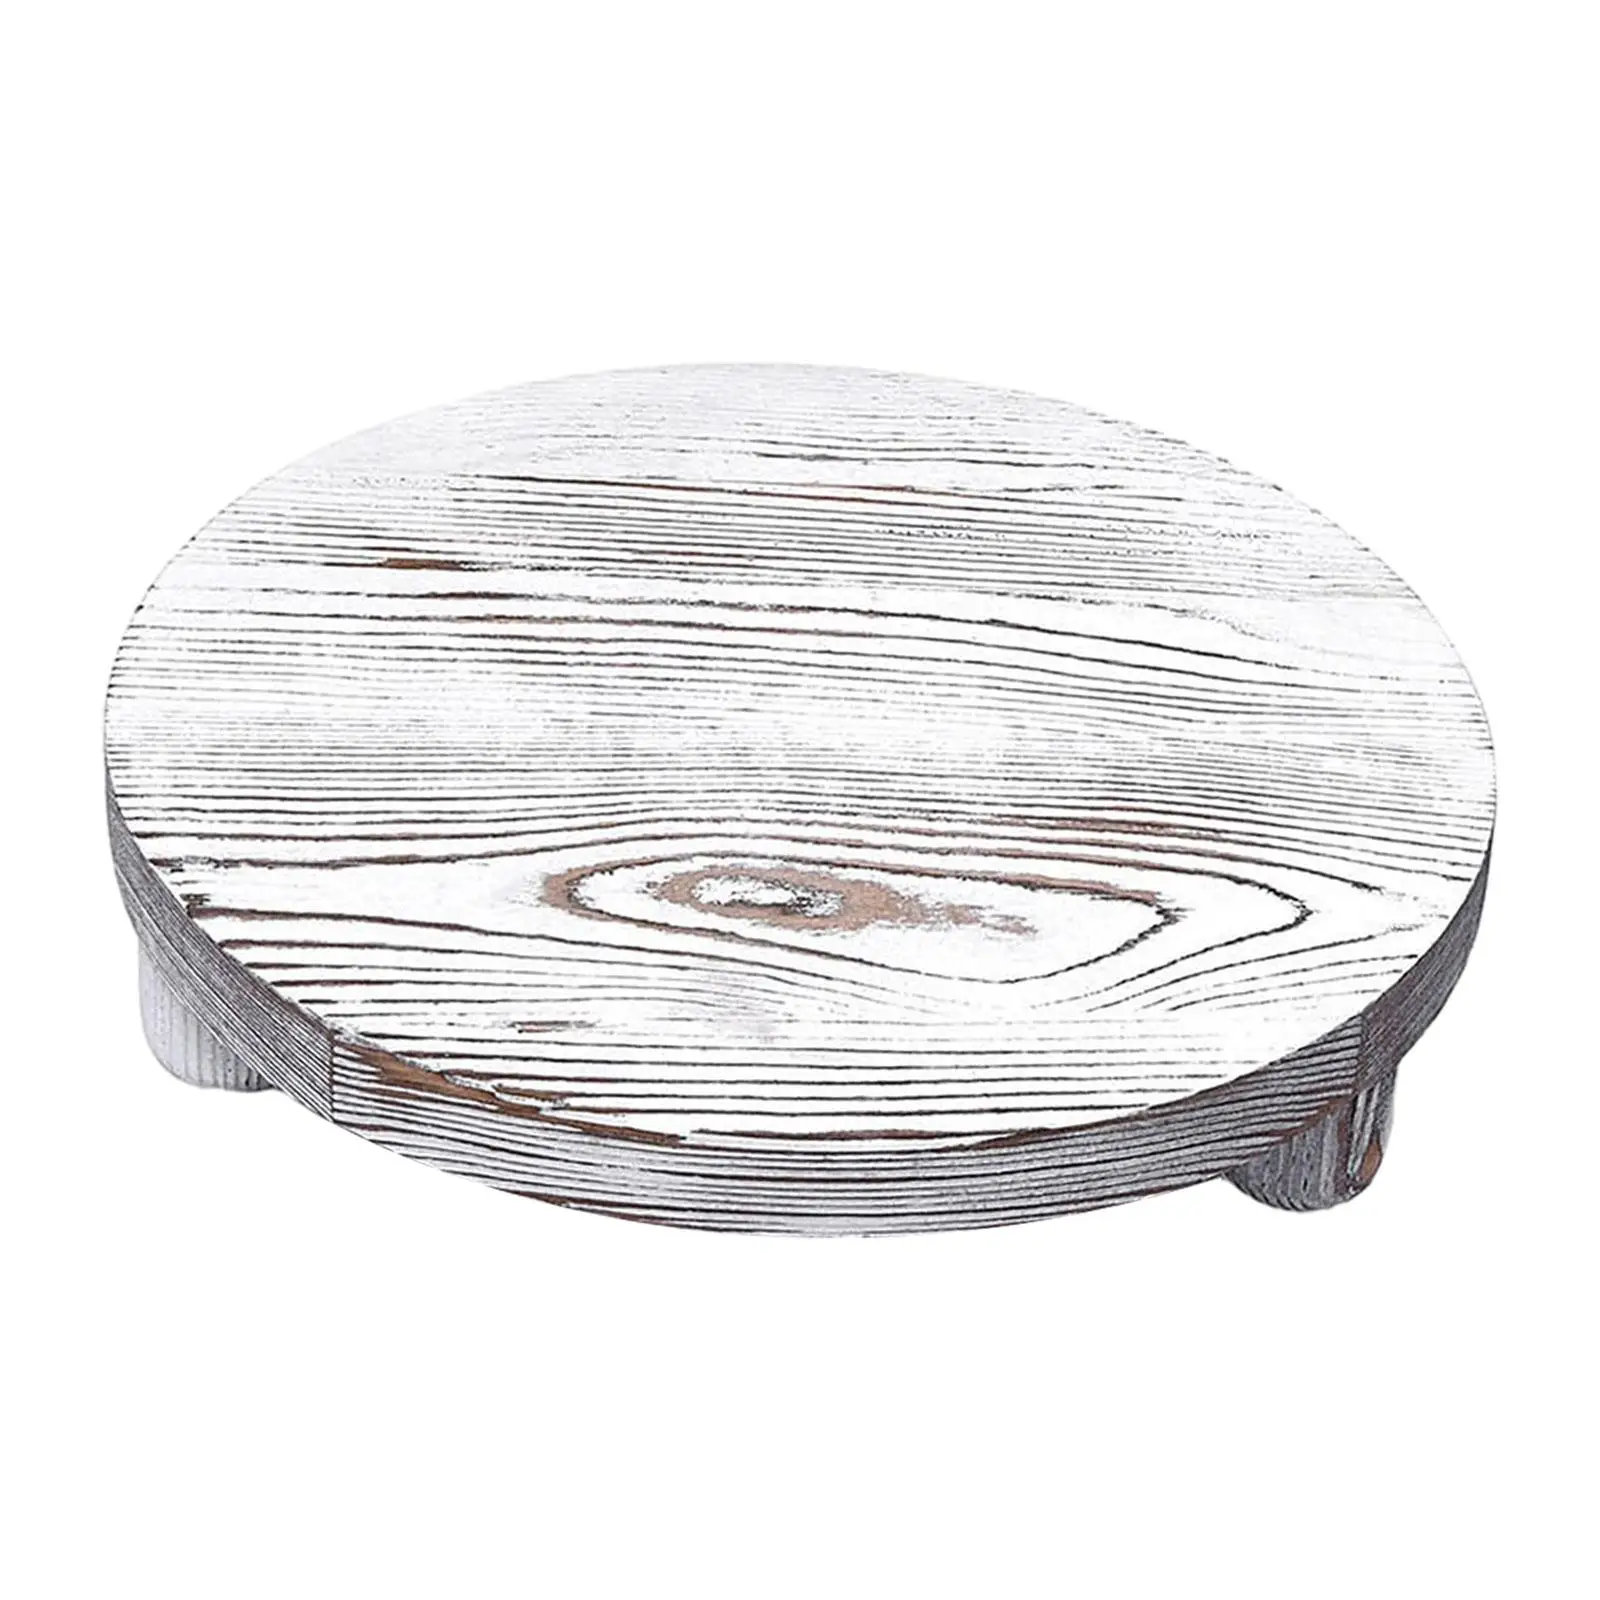 Wood Pedestal Tray Farmhouse Table Bathroom Round Kitchen Decorative Riser for Display Dessert Indoor Plant Pot Candle Soap Dish